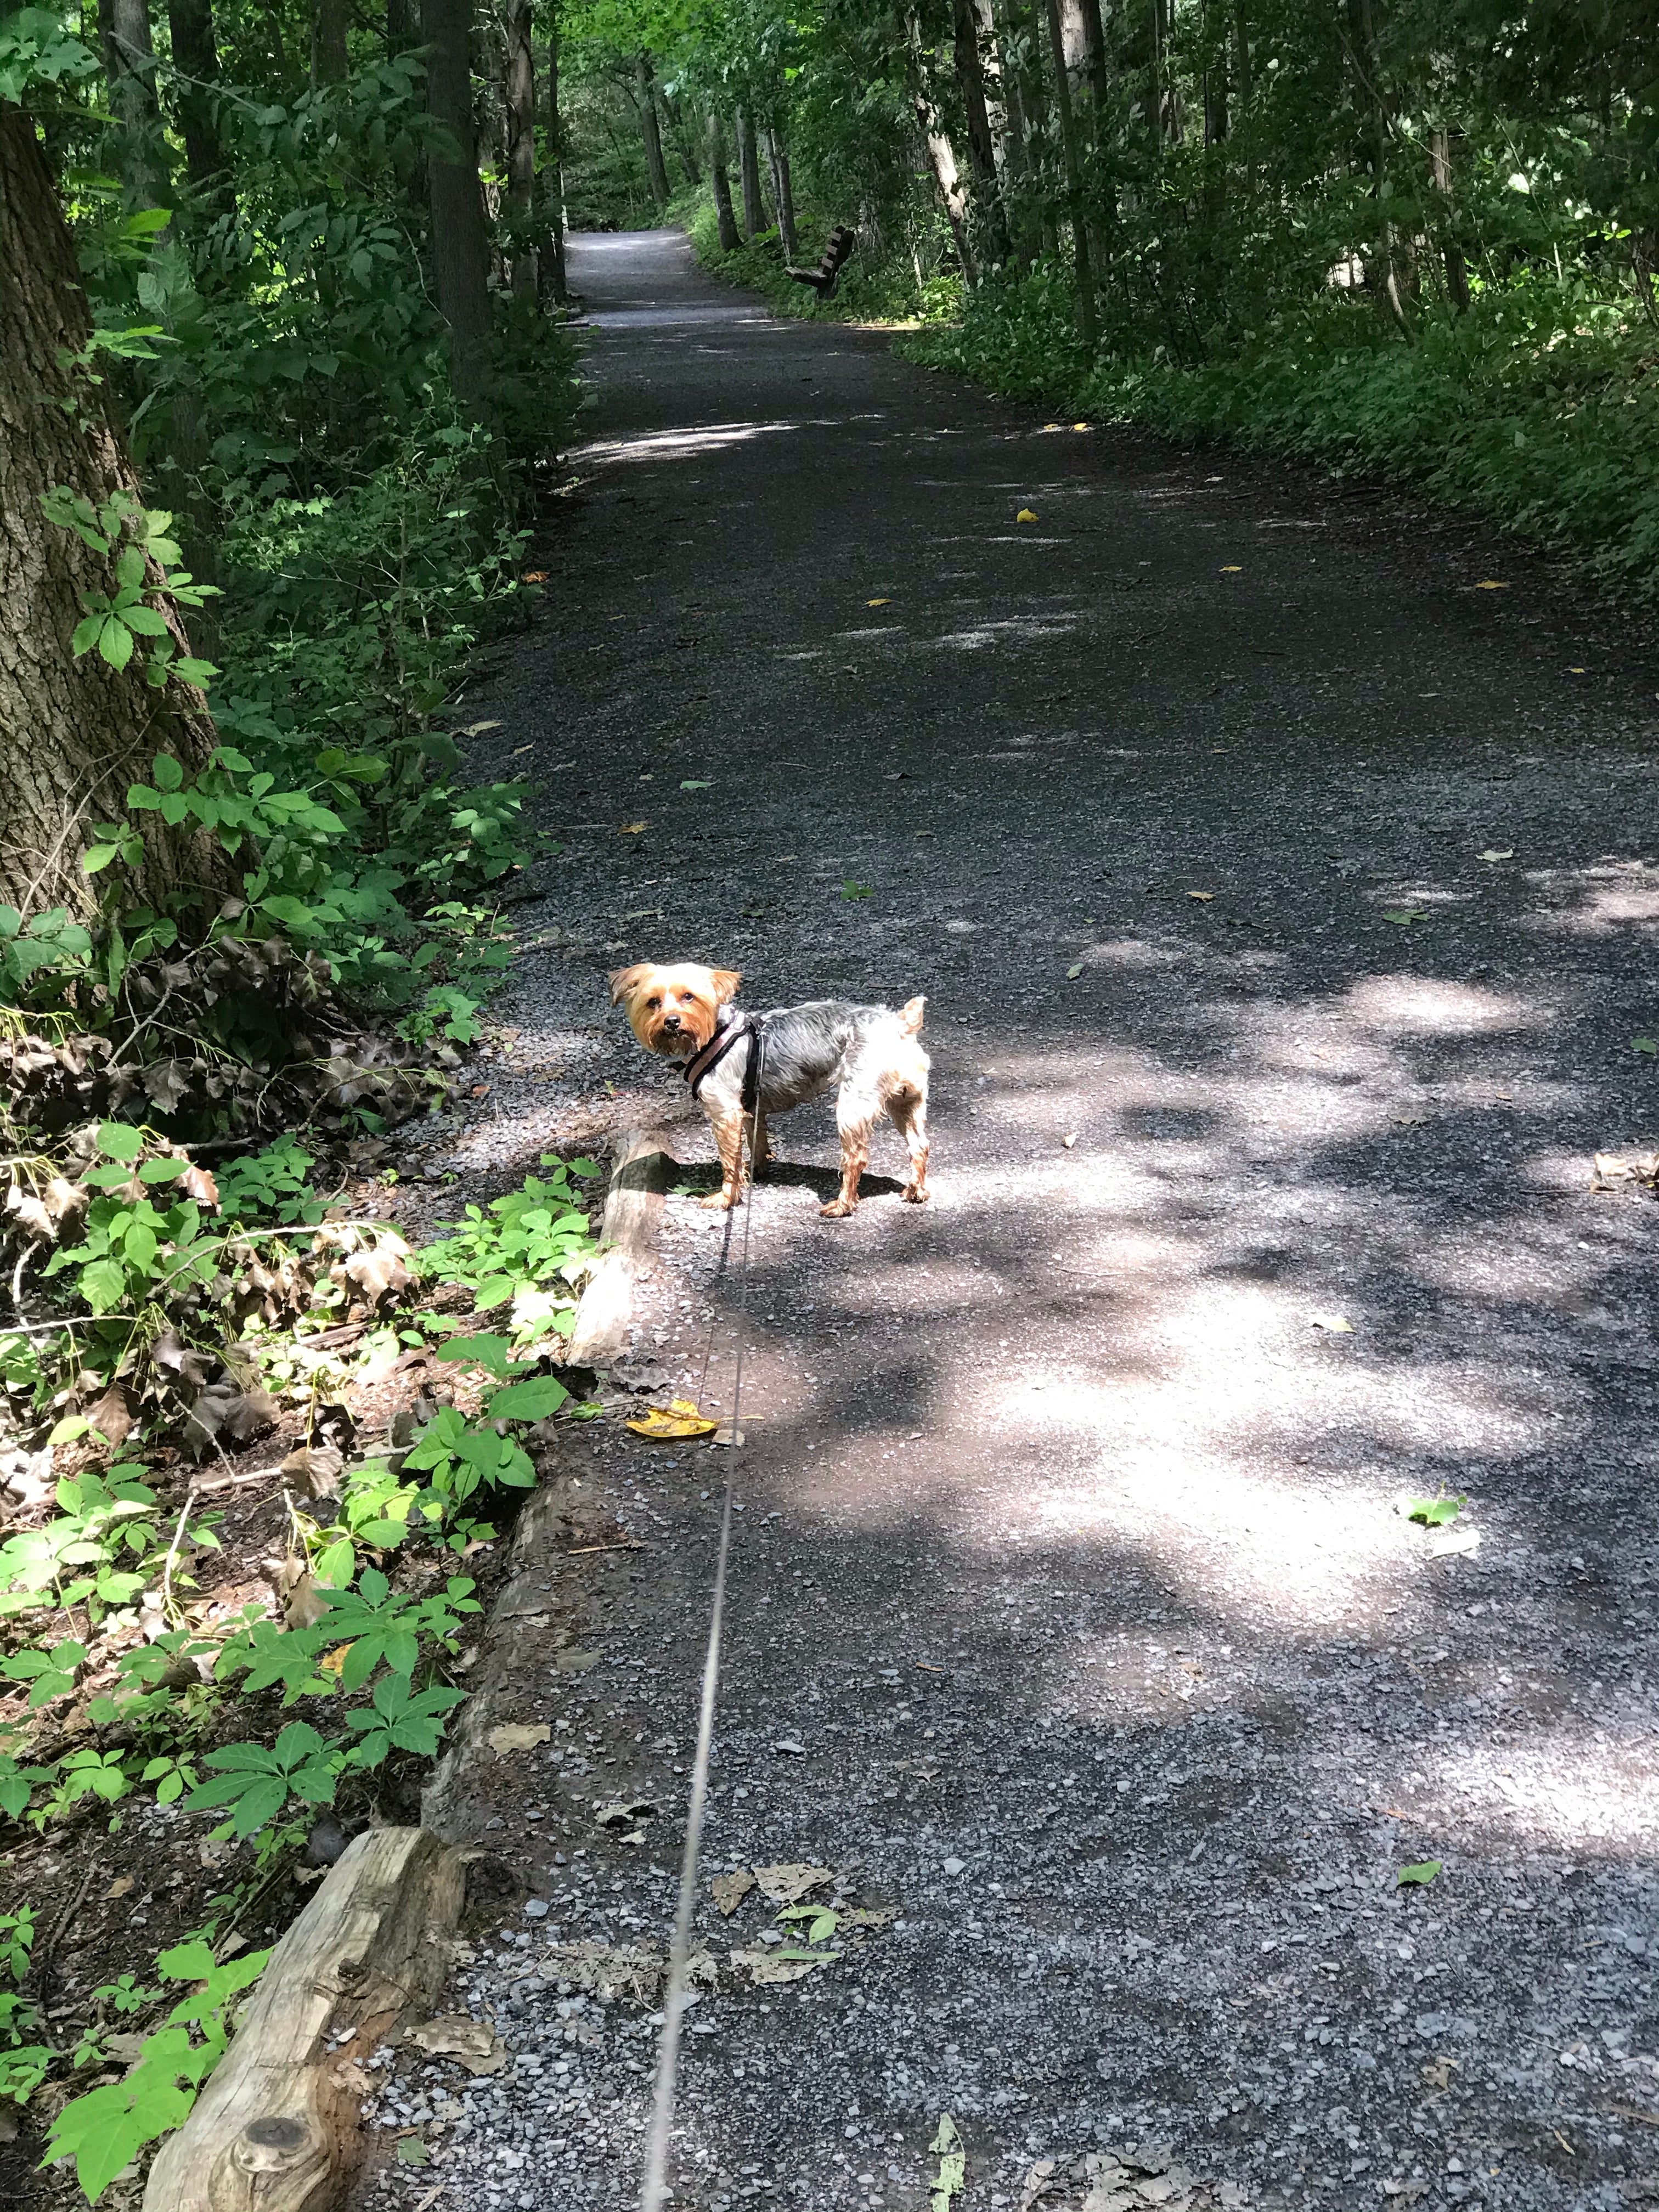 Cocoa on her daily 5 mile walk. There are much shorter trails but I love taking my time and walking around the lakes.